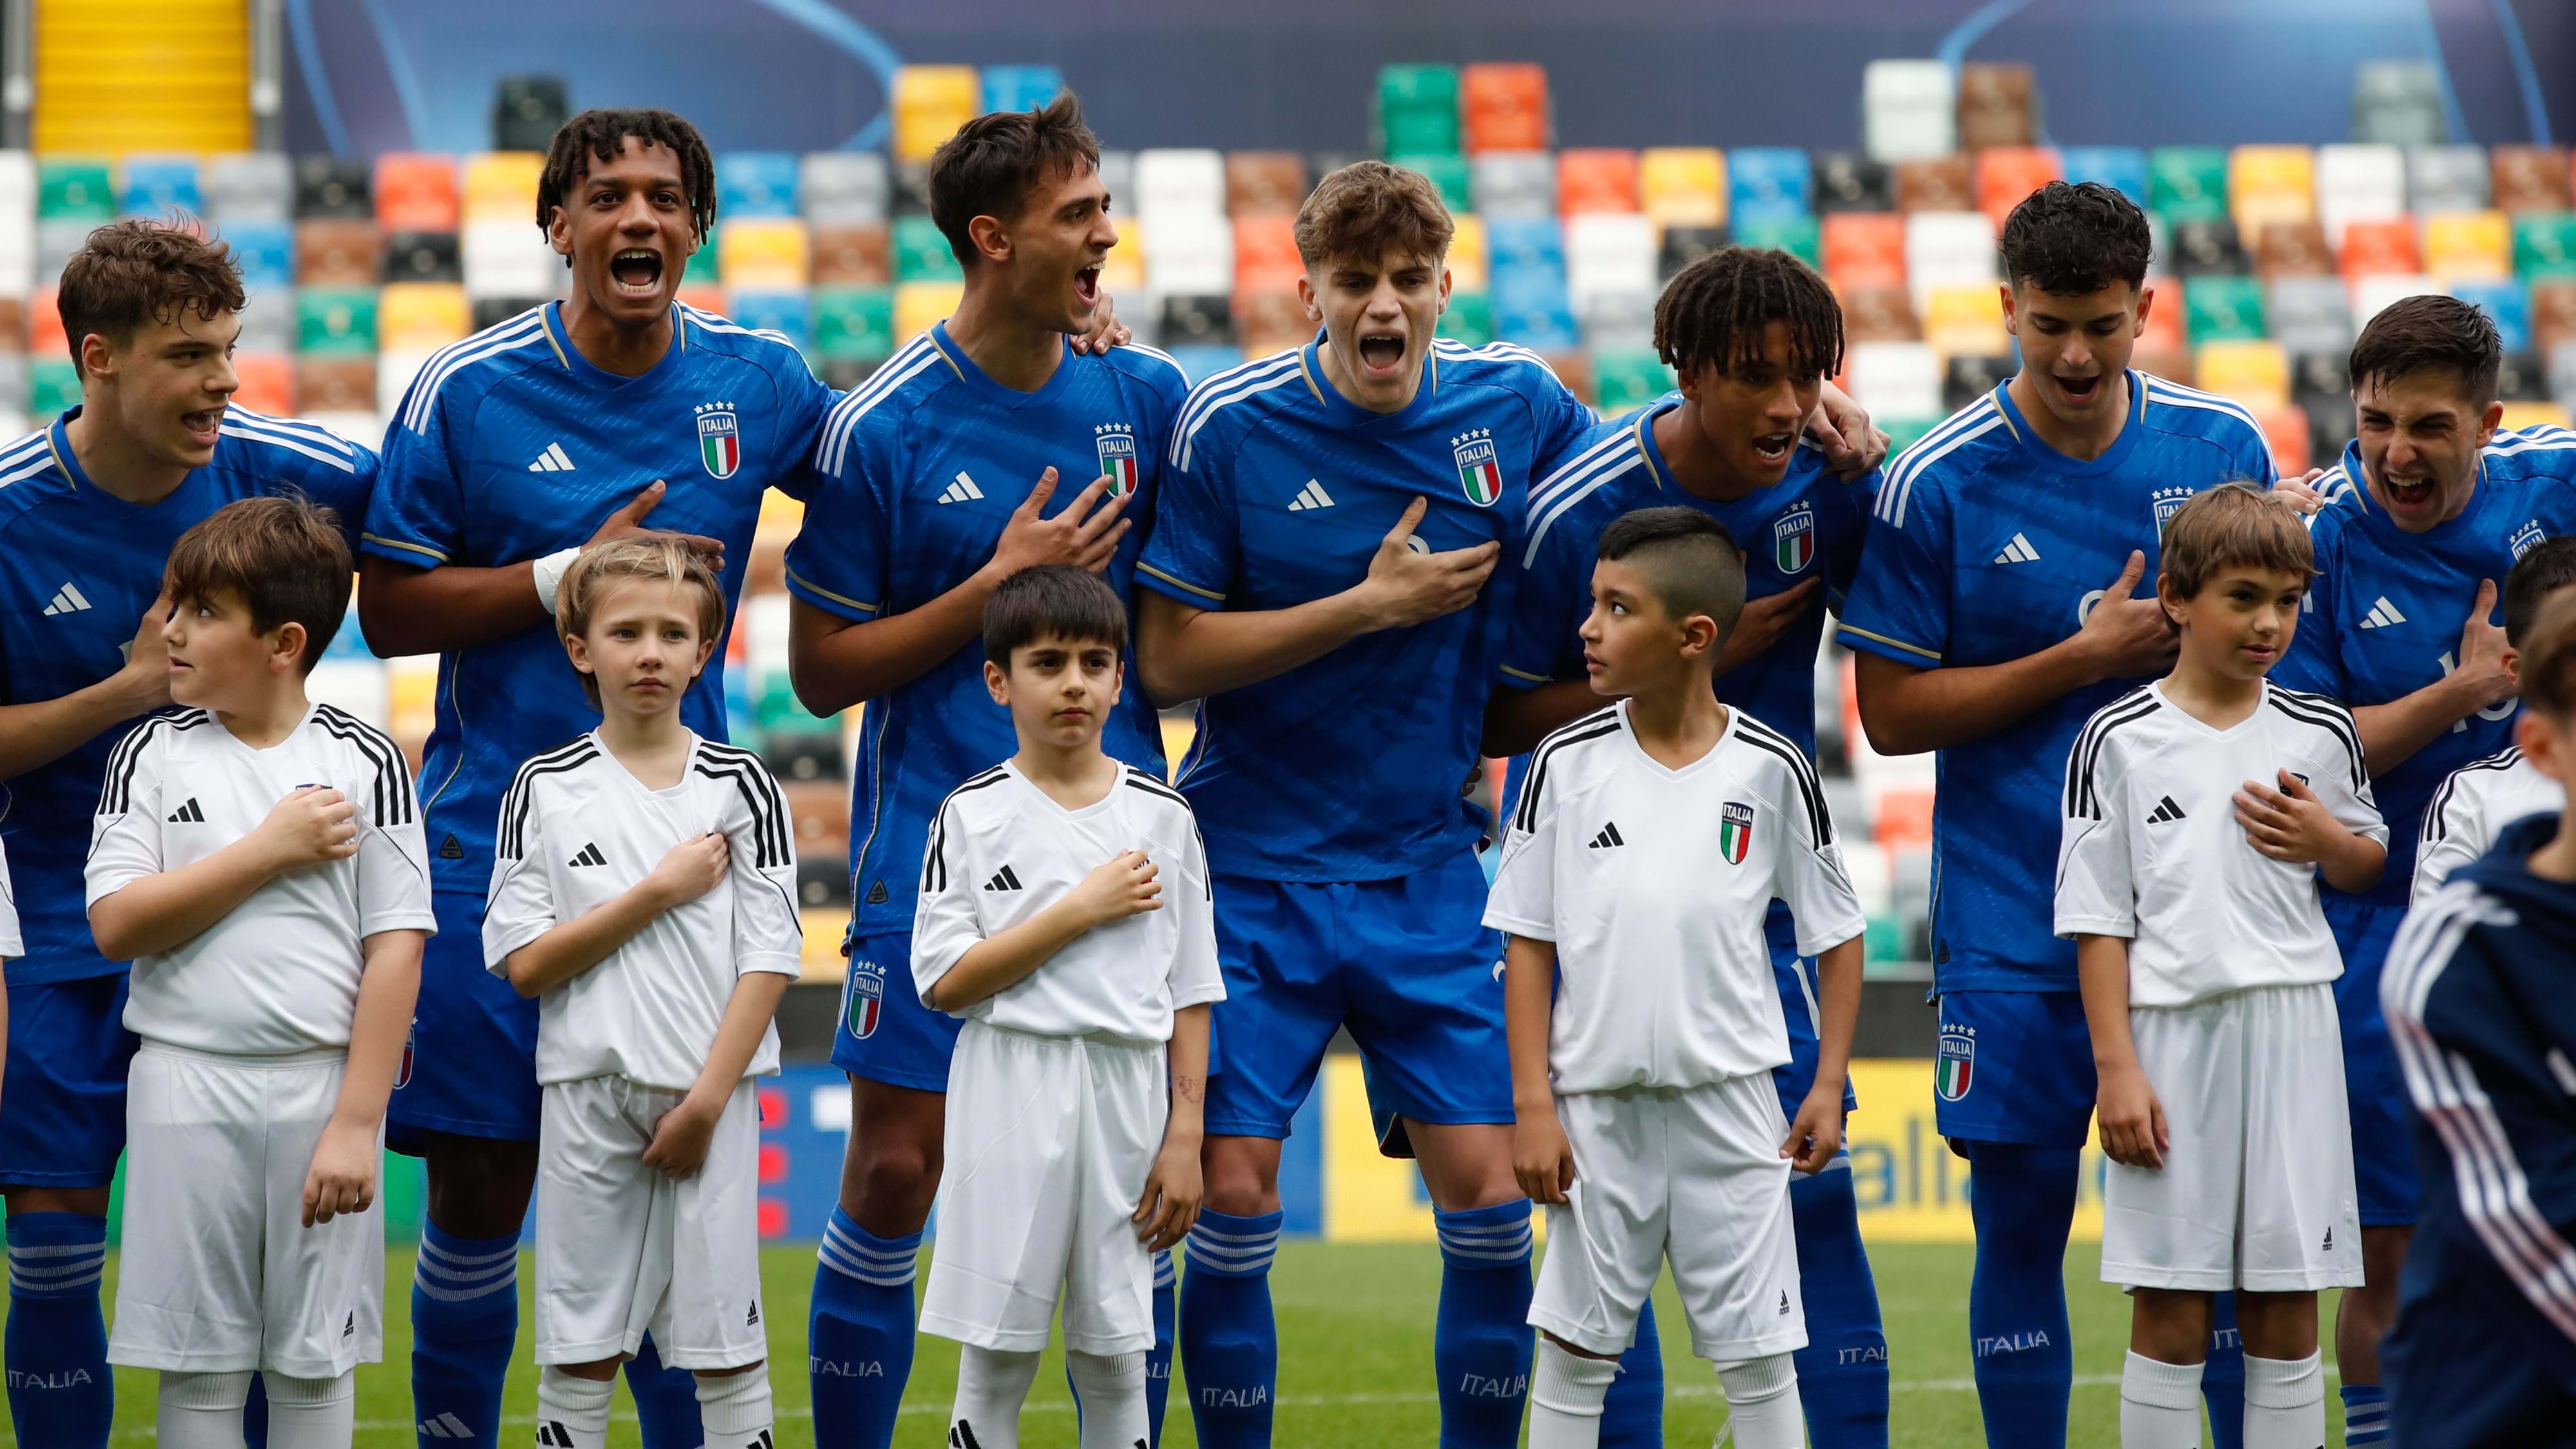 In defence of the European throne, Italy to discover its group rivals. The draw for the finals will take place in Belfast